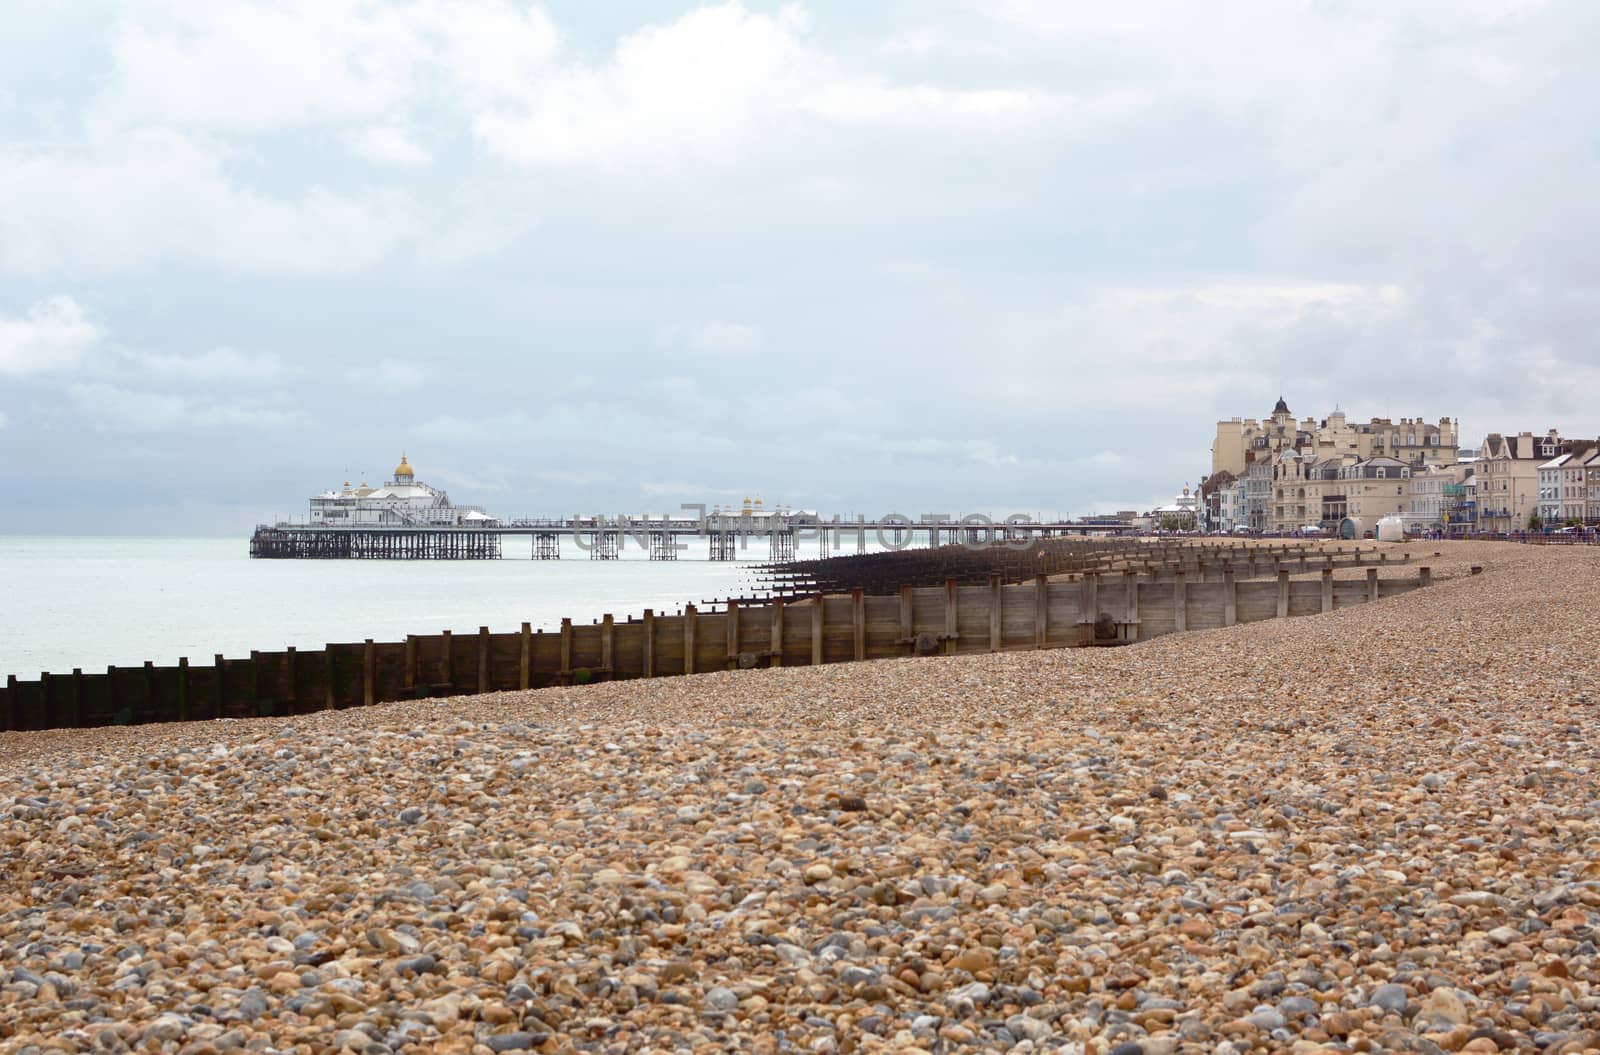 Eastbourne pebble beach in East Sussex with the famous Eastbourne pleasure pier above the sea in the distance